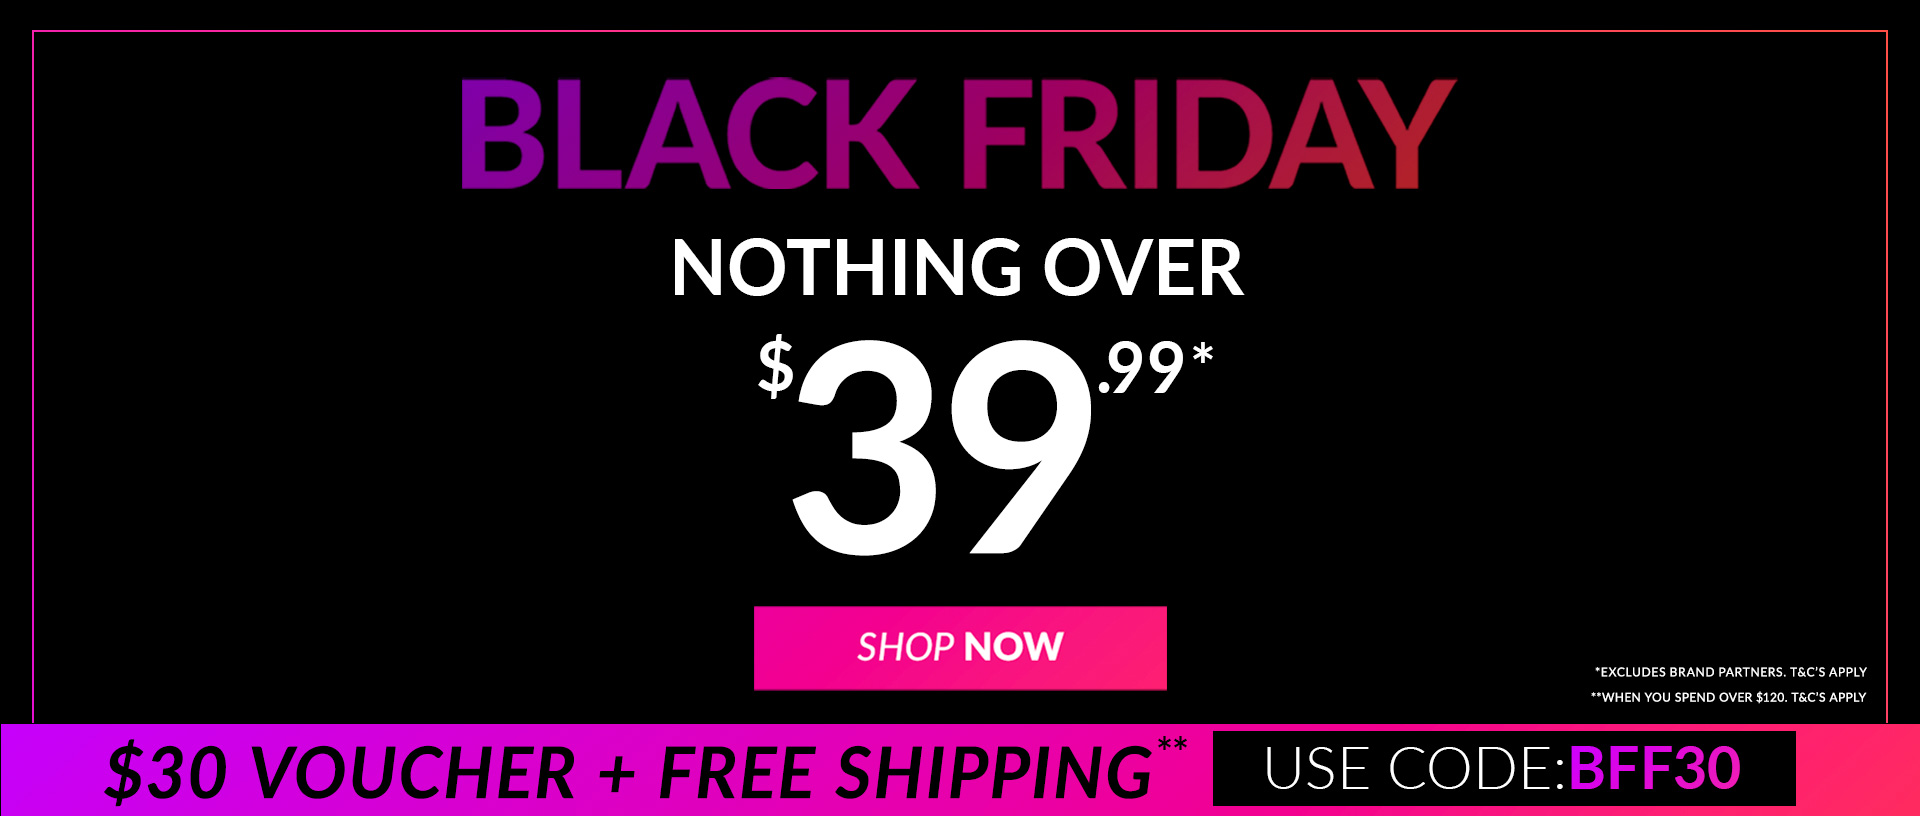 Ezibuy Black Friday nothing over $39.99 + $30 OFF &free shipping with discount code(min. spend $120)